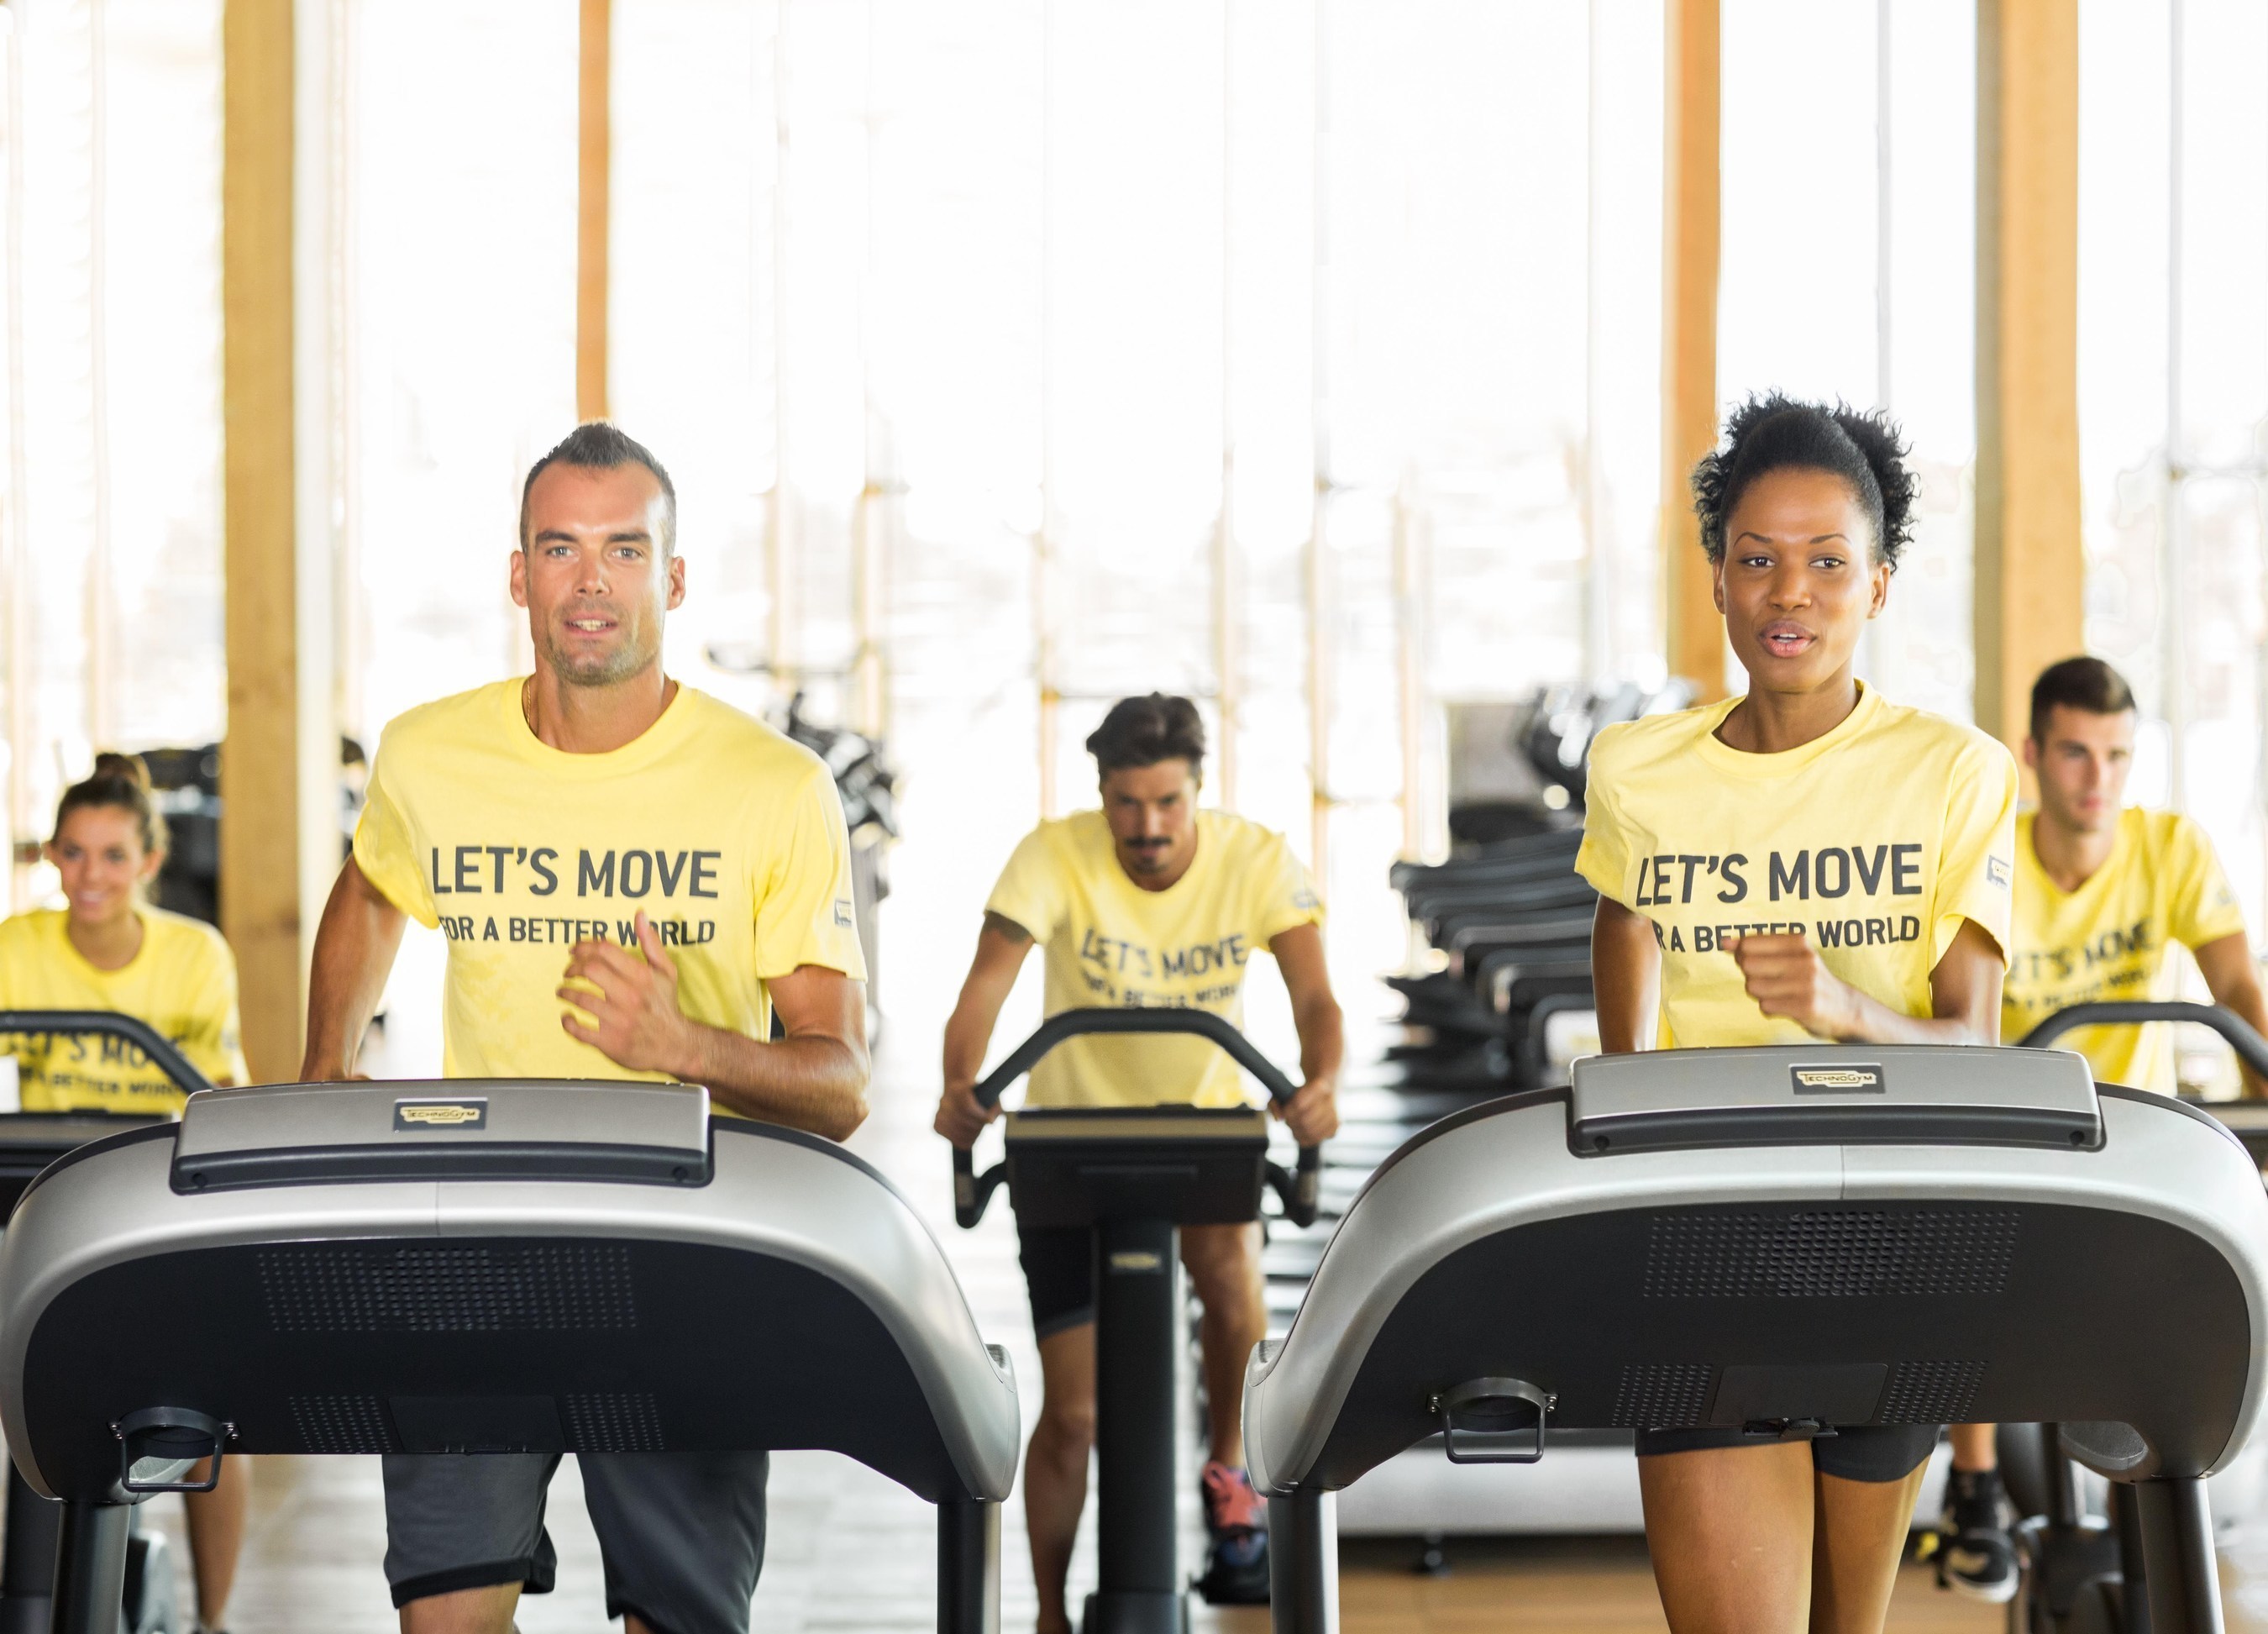 Technogym Letâeuro(TM)s Move for a Better World Social Campaign. From 1st-19th March 2016, a fitness event for a fun way to get fit and meet people who want to get moving, while doing good for others' (PRNewsFoto/Technogym) (PRNewsFoto/Technogym)